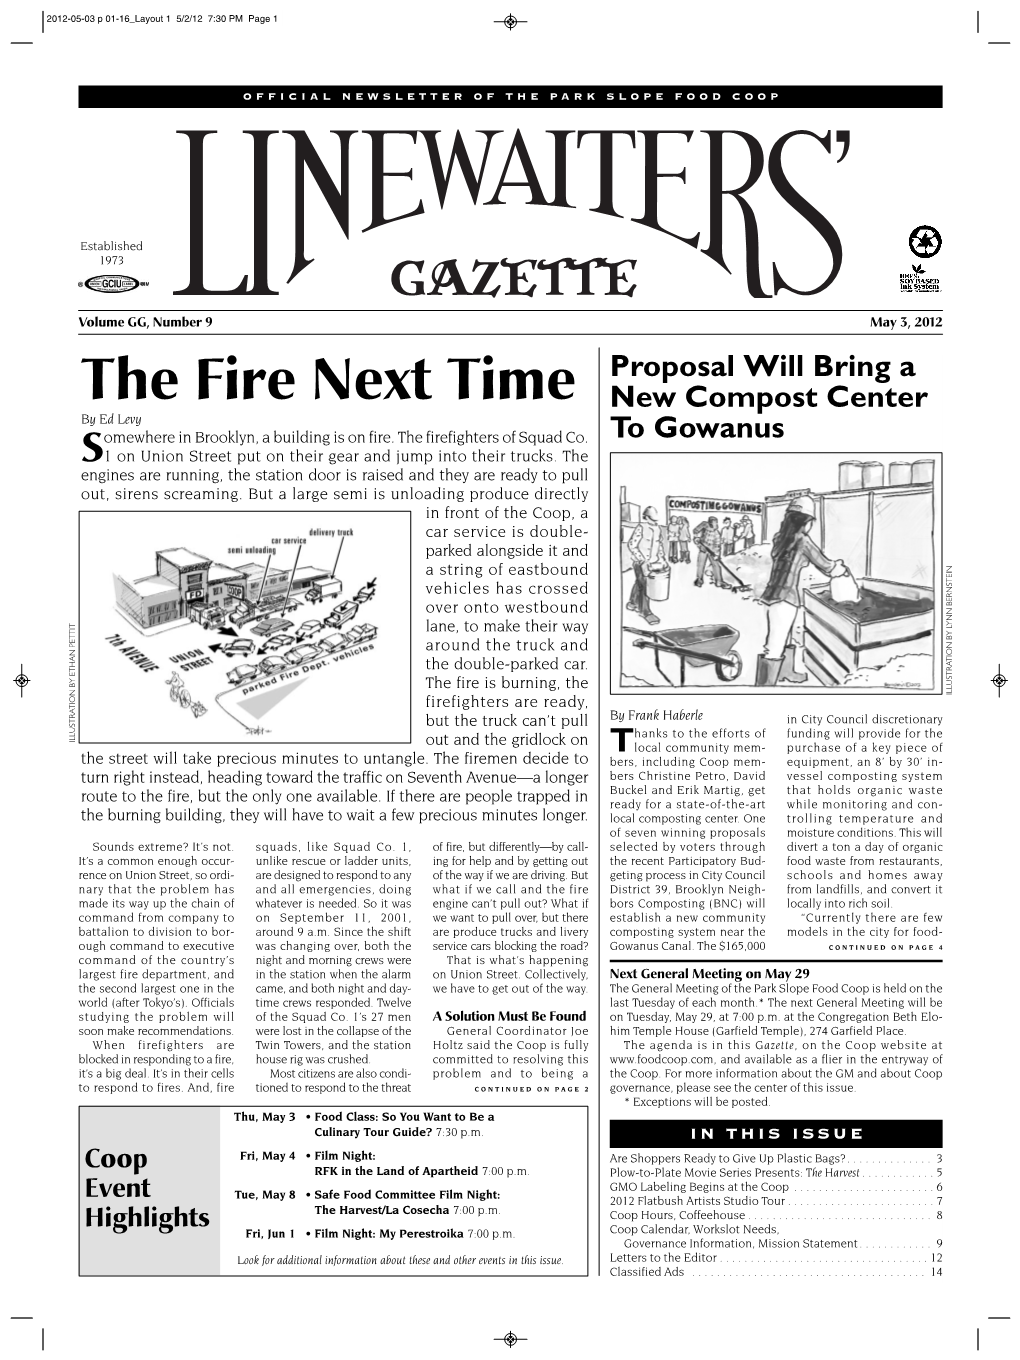 The Fire Next Time New Compost Center by Ed Levy Omewhere in Brooklyn, a Building Is on Fire